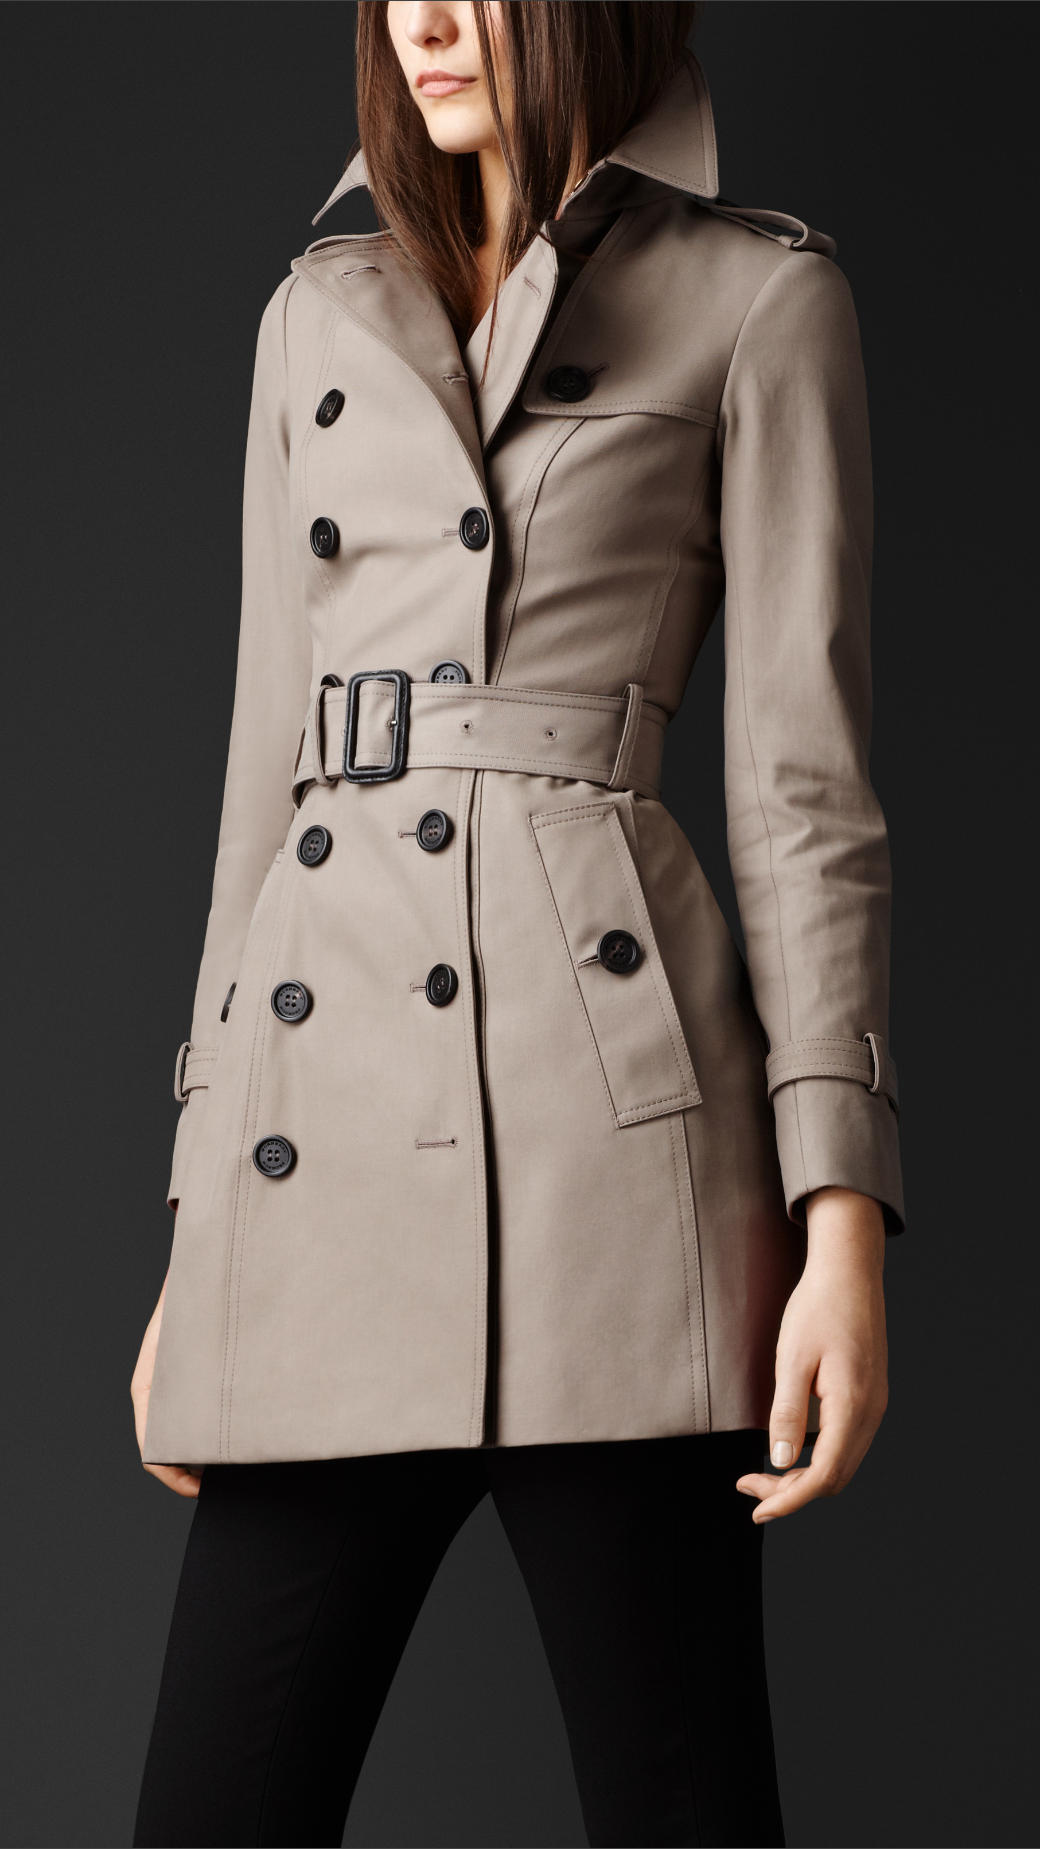 Lyst - Burberry Double Cotton Twill Trench Coat in Natural